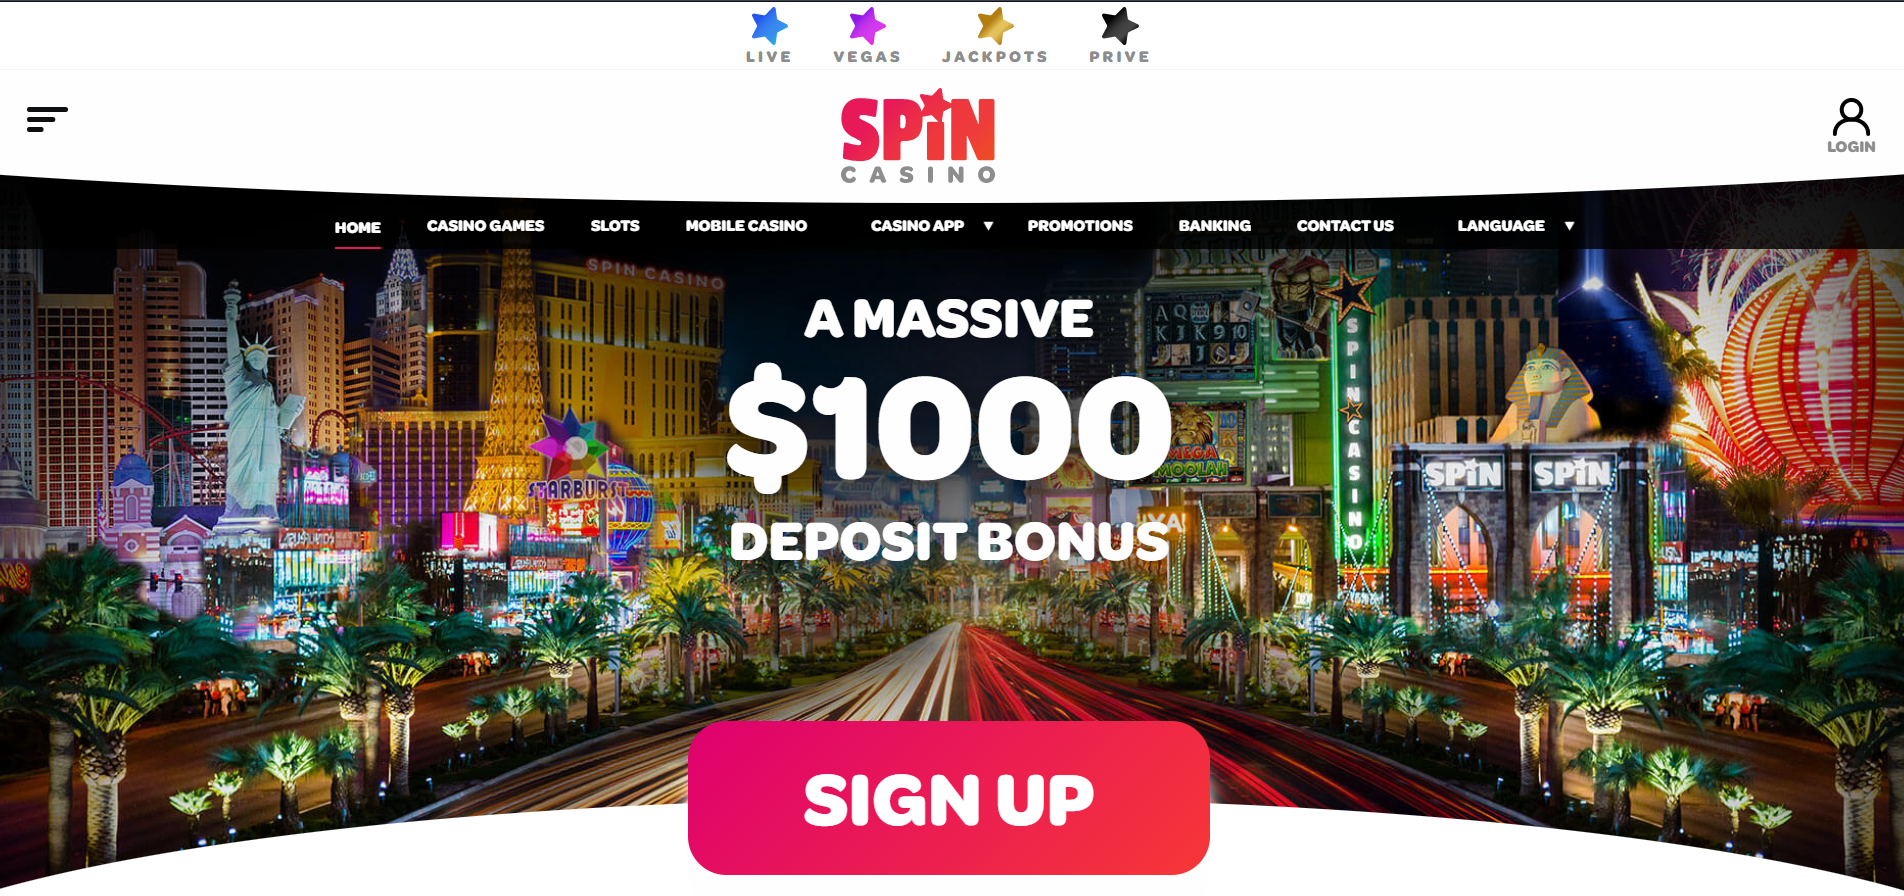 Spin Online Casino homepage